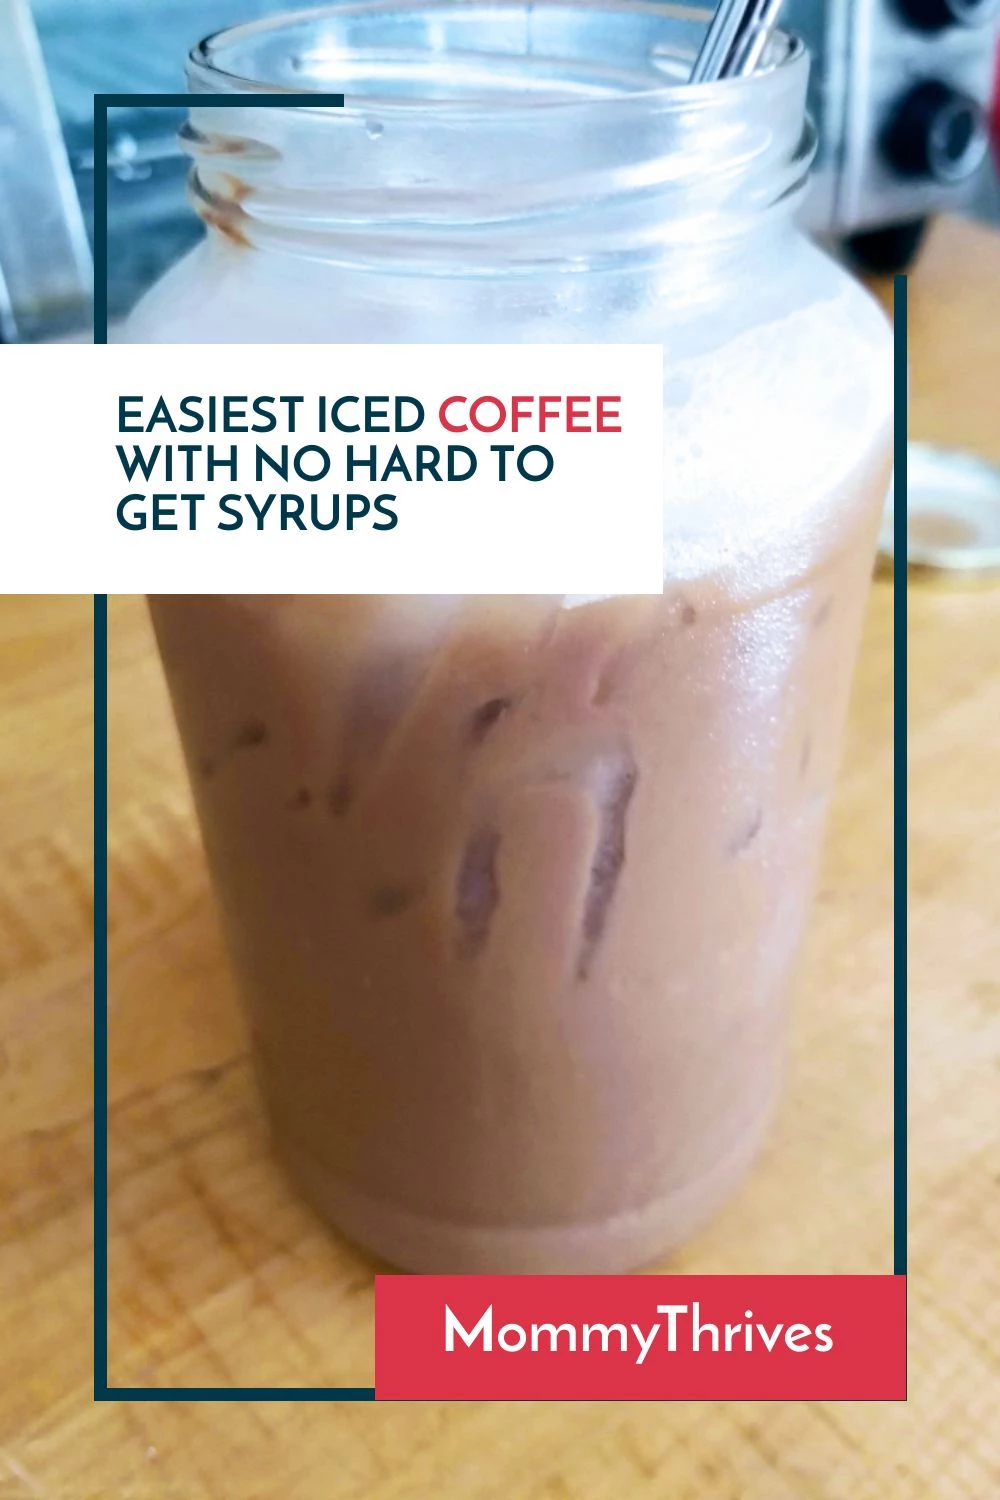 https://www.mommythrives.com/wp-content/uploads/2020/06/4-Ingredient-Iced-Coffee-Delicious-Iced-Coffee-Recipe-Simple-Iced-Coffee-Recipe.webp